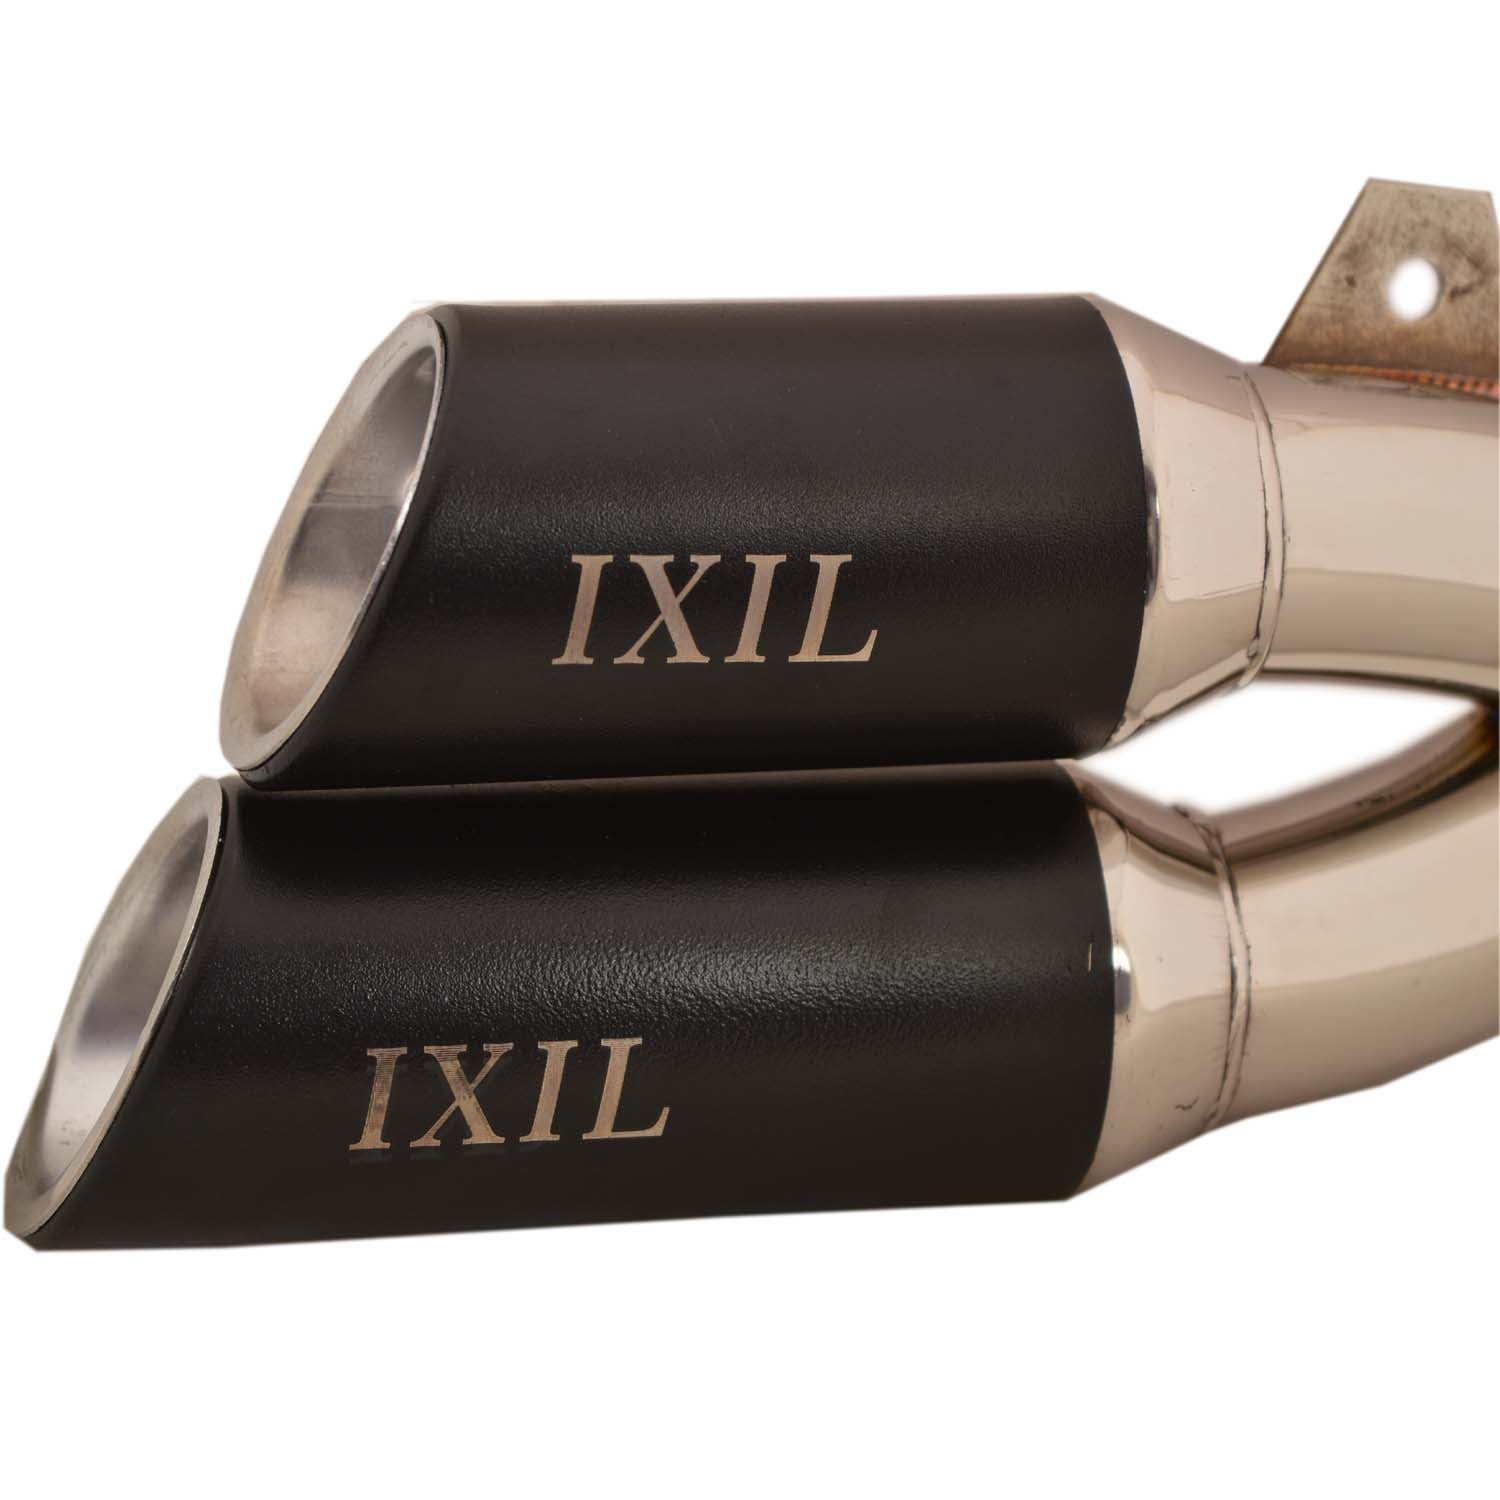 End Silencer Exhaust Universale Exhaust Carbon With DB Killer Dm. 54